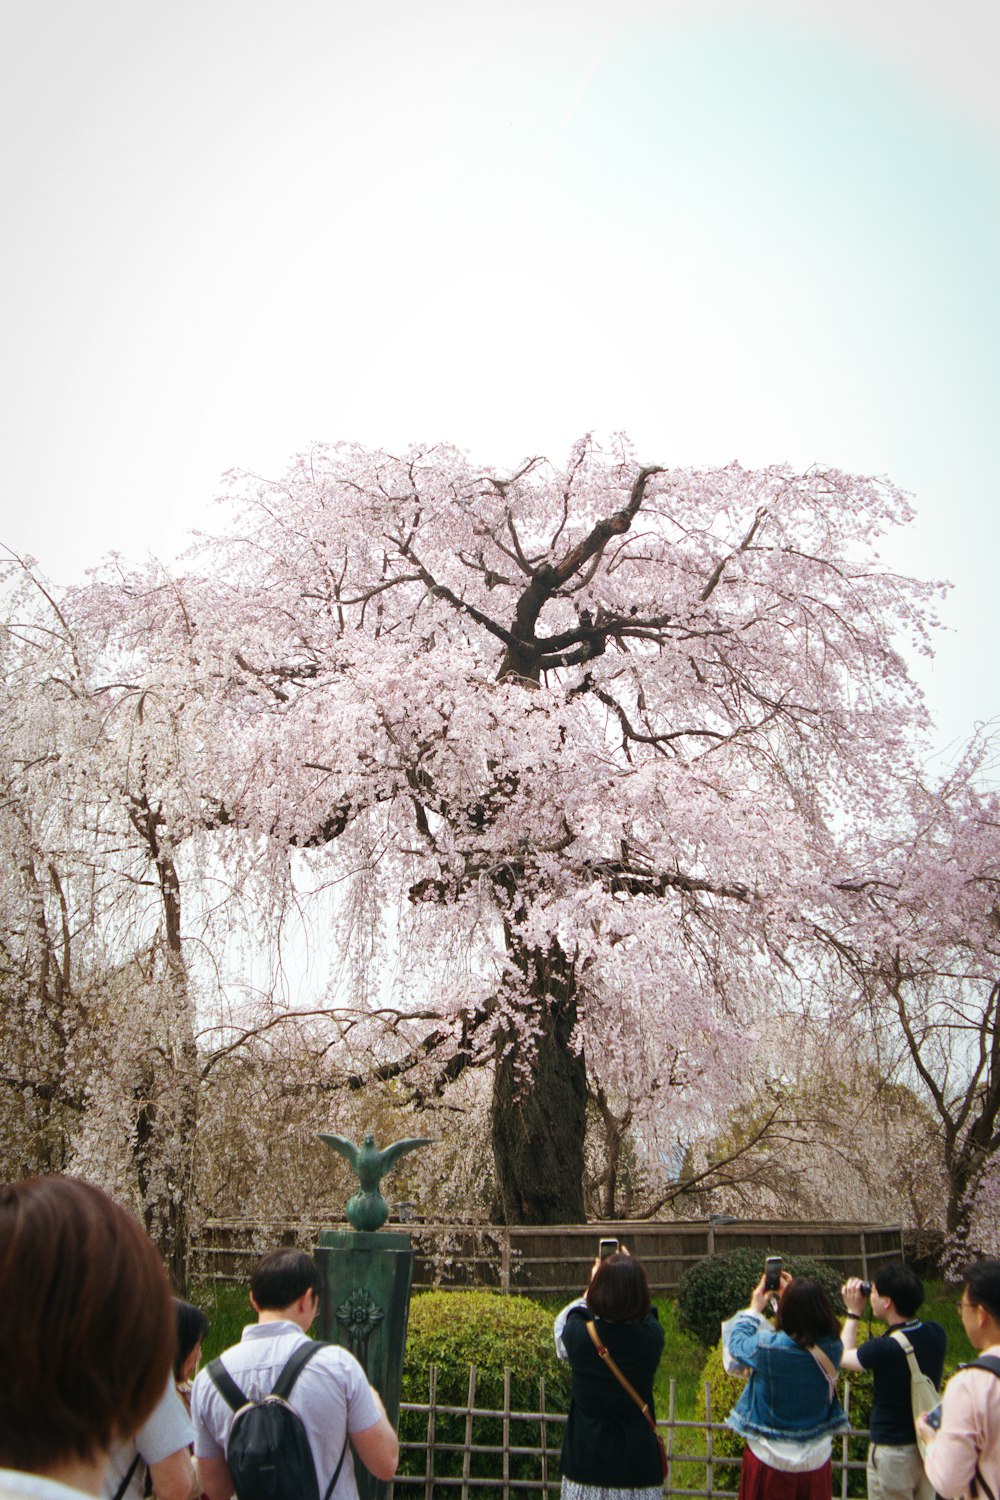 a group of people taking pictures of a cherry blossom tree